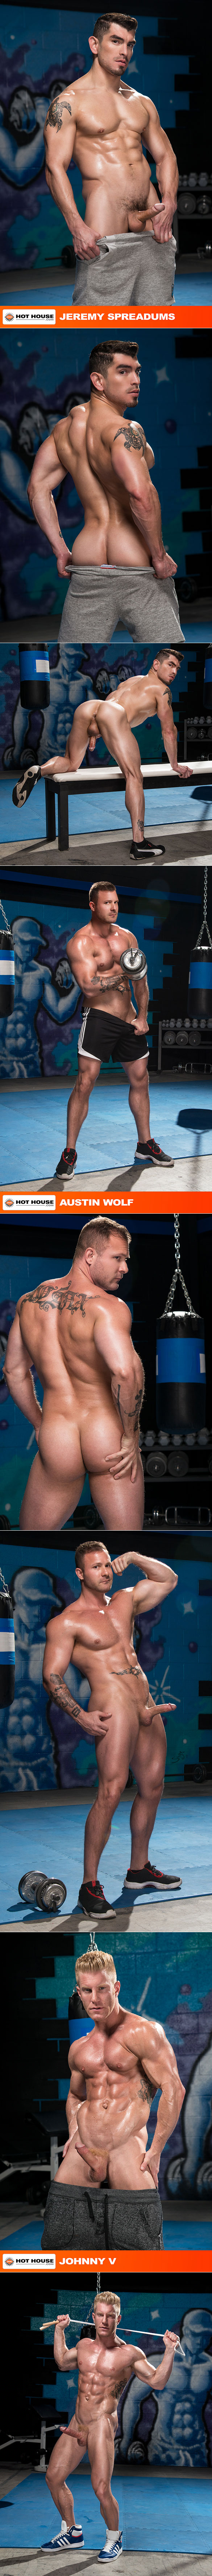 HotHouse: Austin Wolf, Johnny V and Jeremy Spreadums' threeway in "The Trainer: No Excuses"